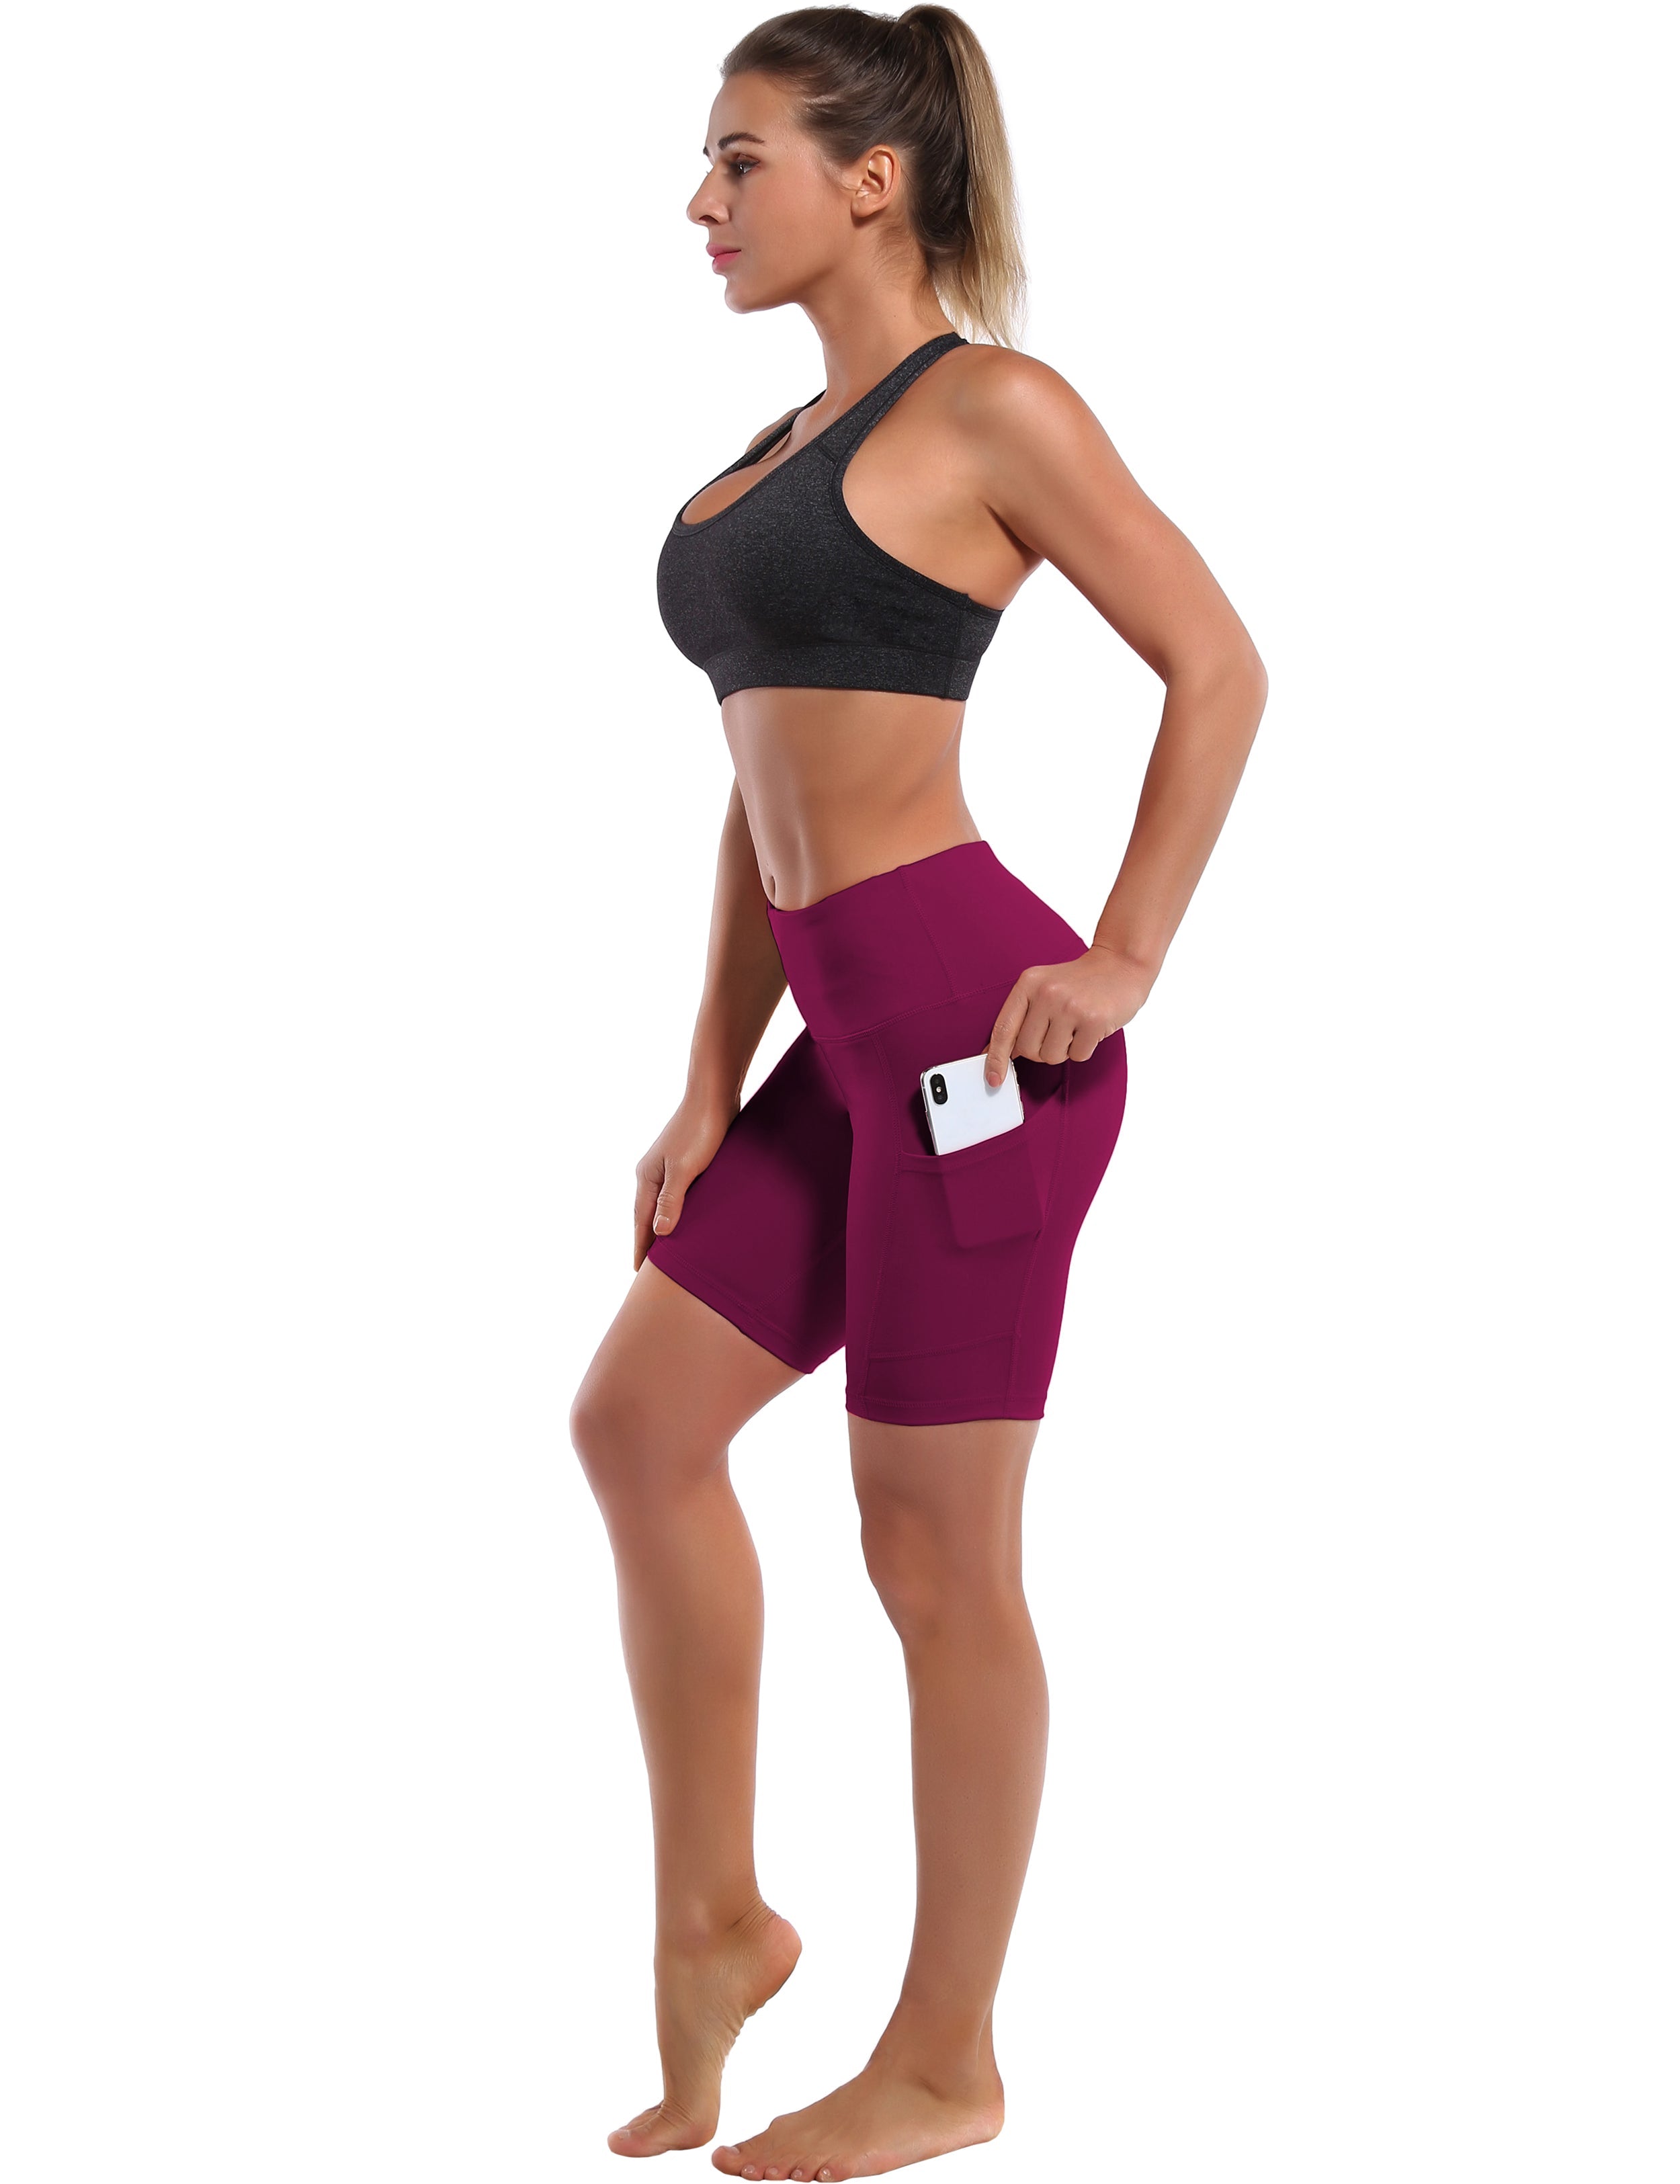 8" Side Pockets yogastudio Shorts grapevine Sleek, soft, smooth and totally comfortable: our newest style is here. Softest-ever fabric High elasticity High density 4-way stretch Fabric doesn't attract lint easily No see-through Moisture-wicking Machine wash 75% Nylon, 25% Spandex